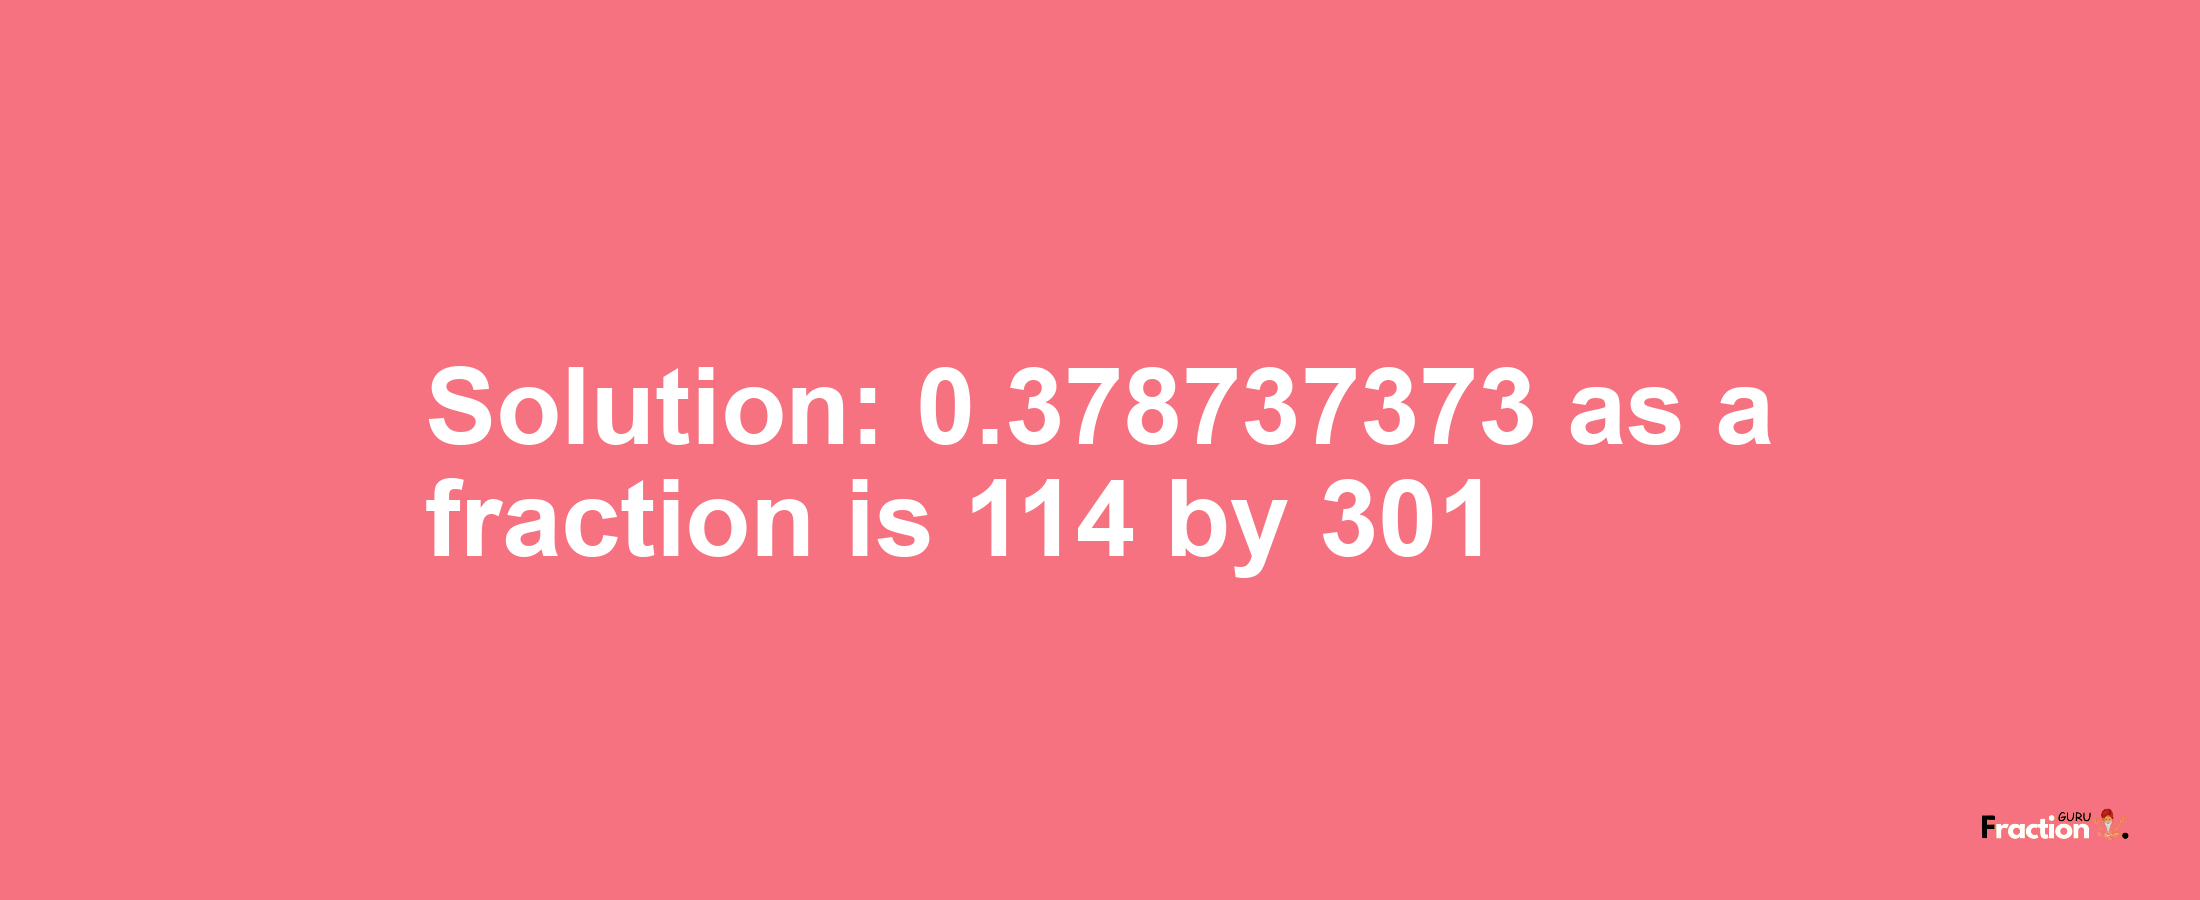 Solution:0.378737373 as a fraction is 114/301